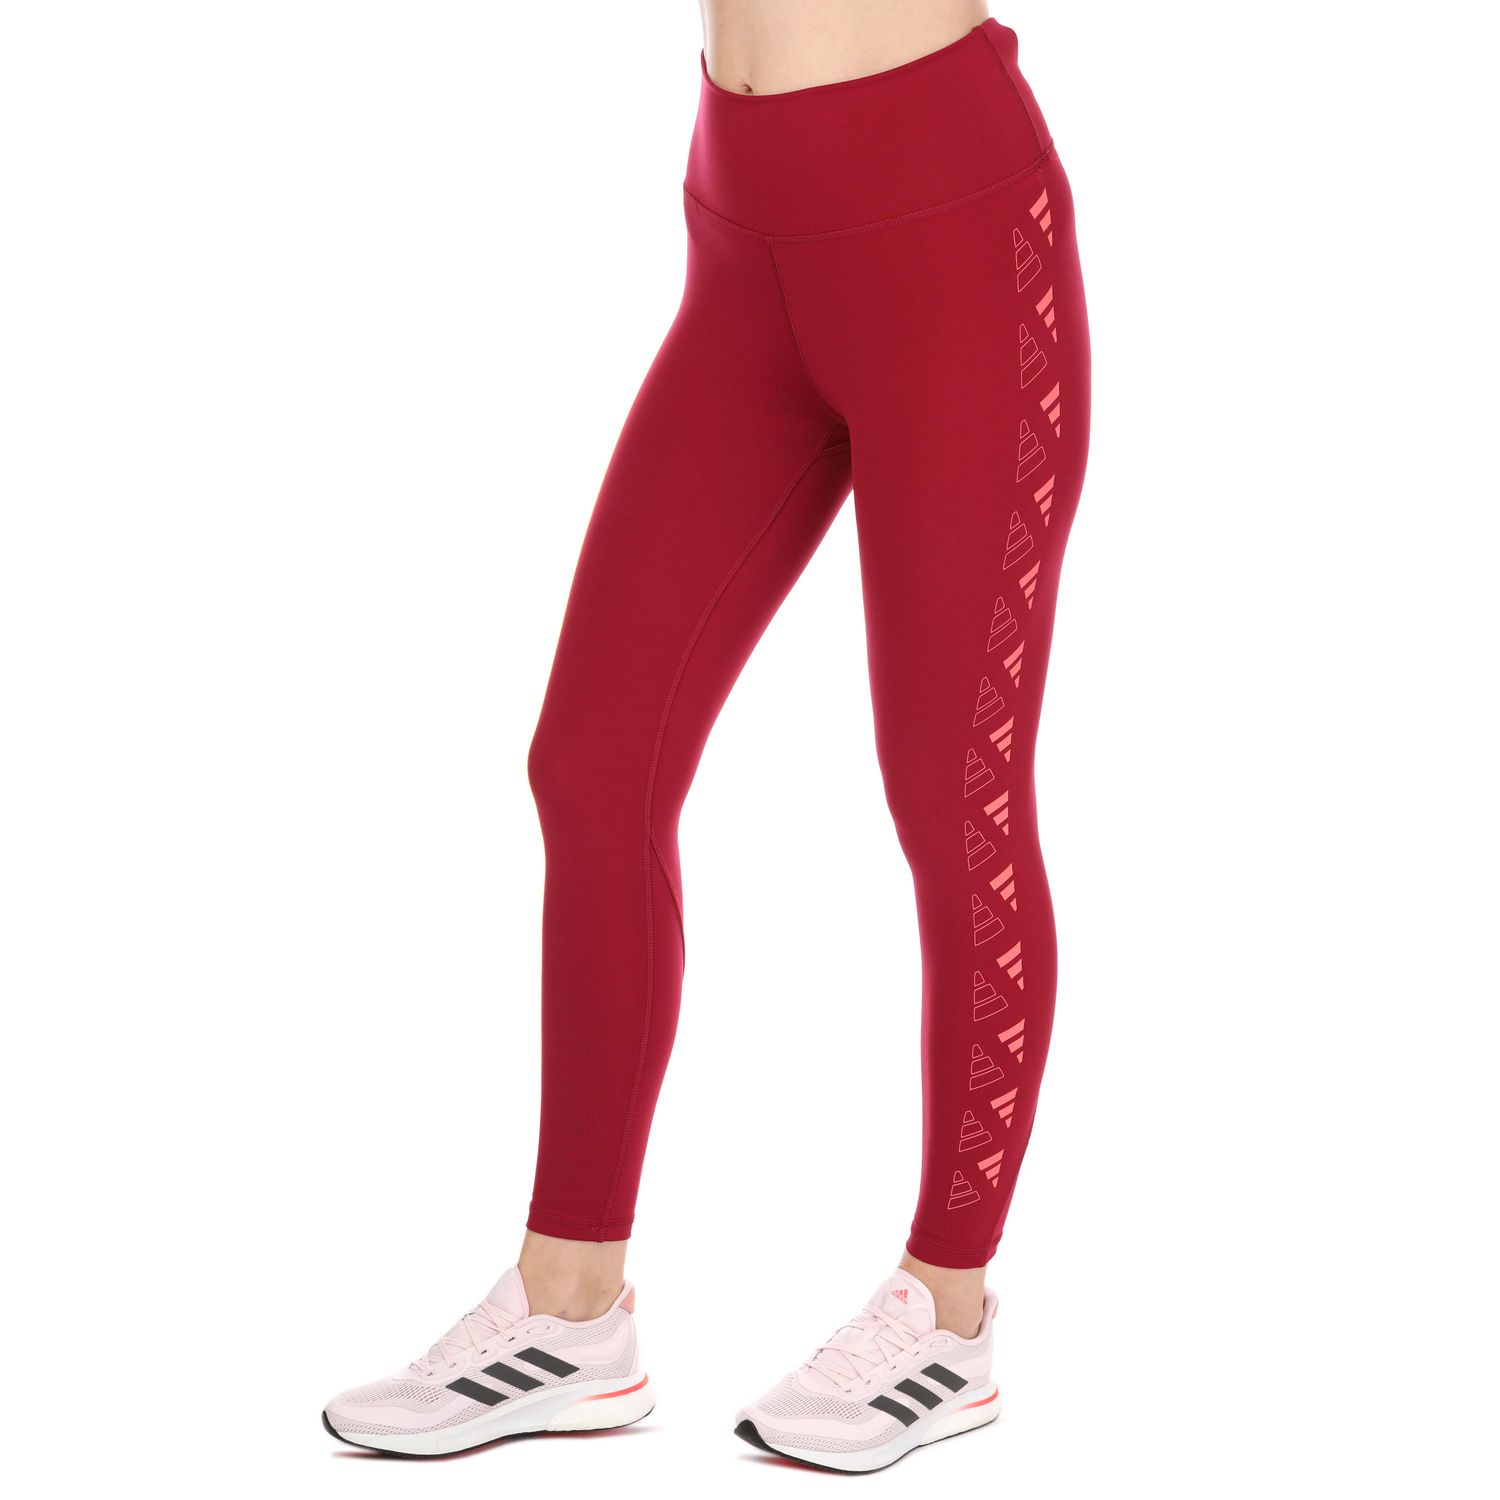 Burgundy adidas Womens Optime 3-Bar Training 7/8 Tights - Get The Label